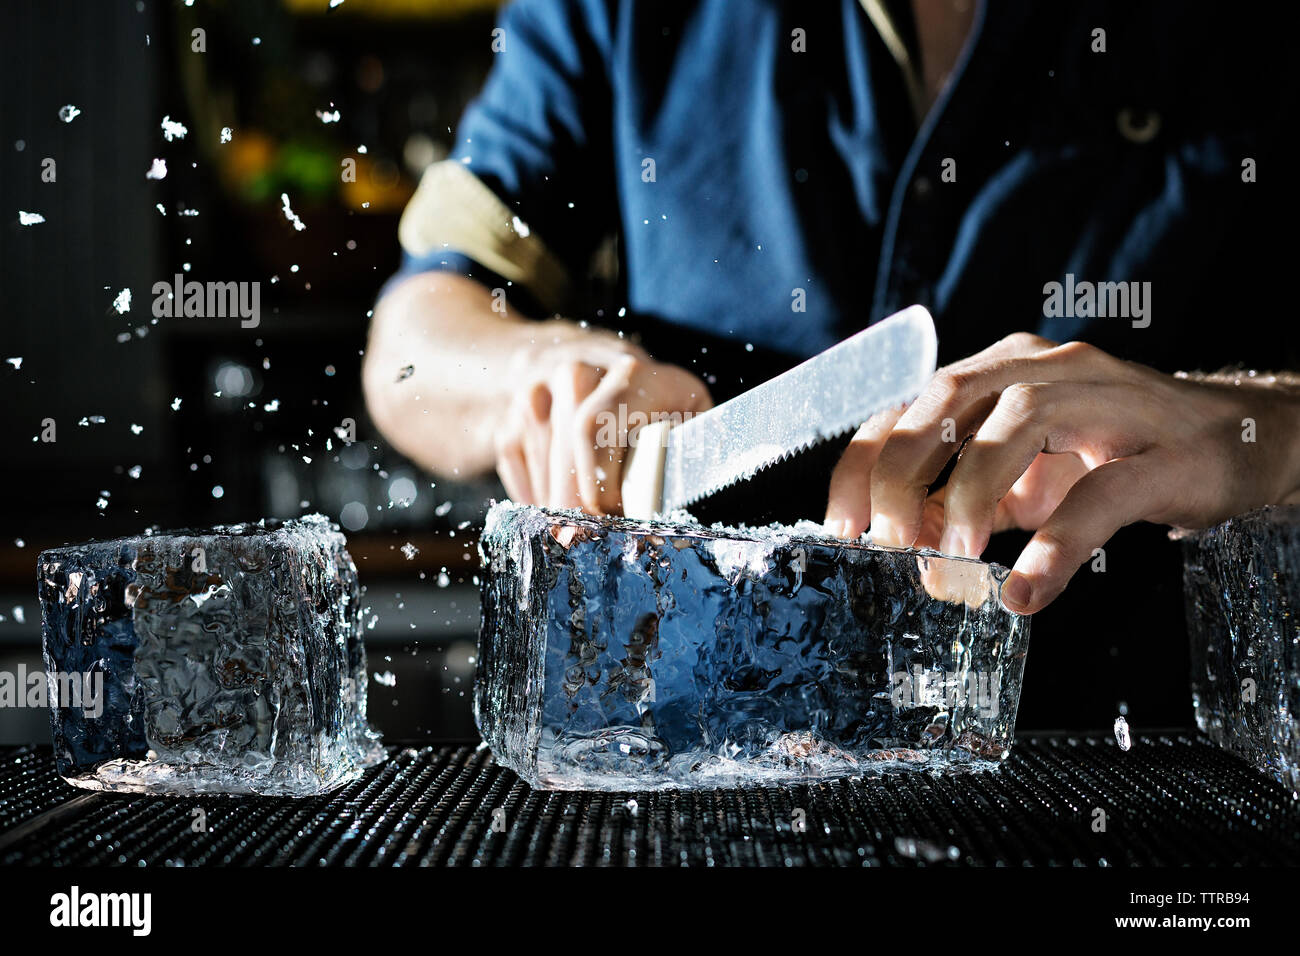 Midsection of chef breaking ice block in kitchen Stock Photo